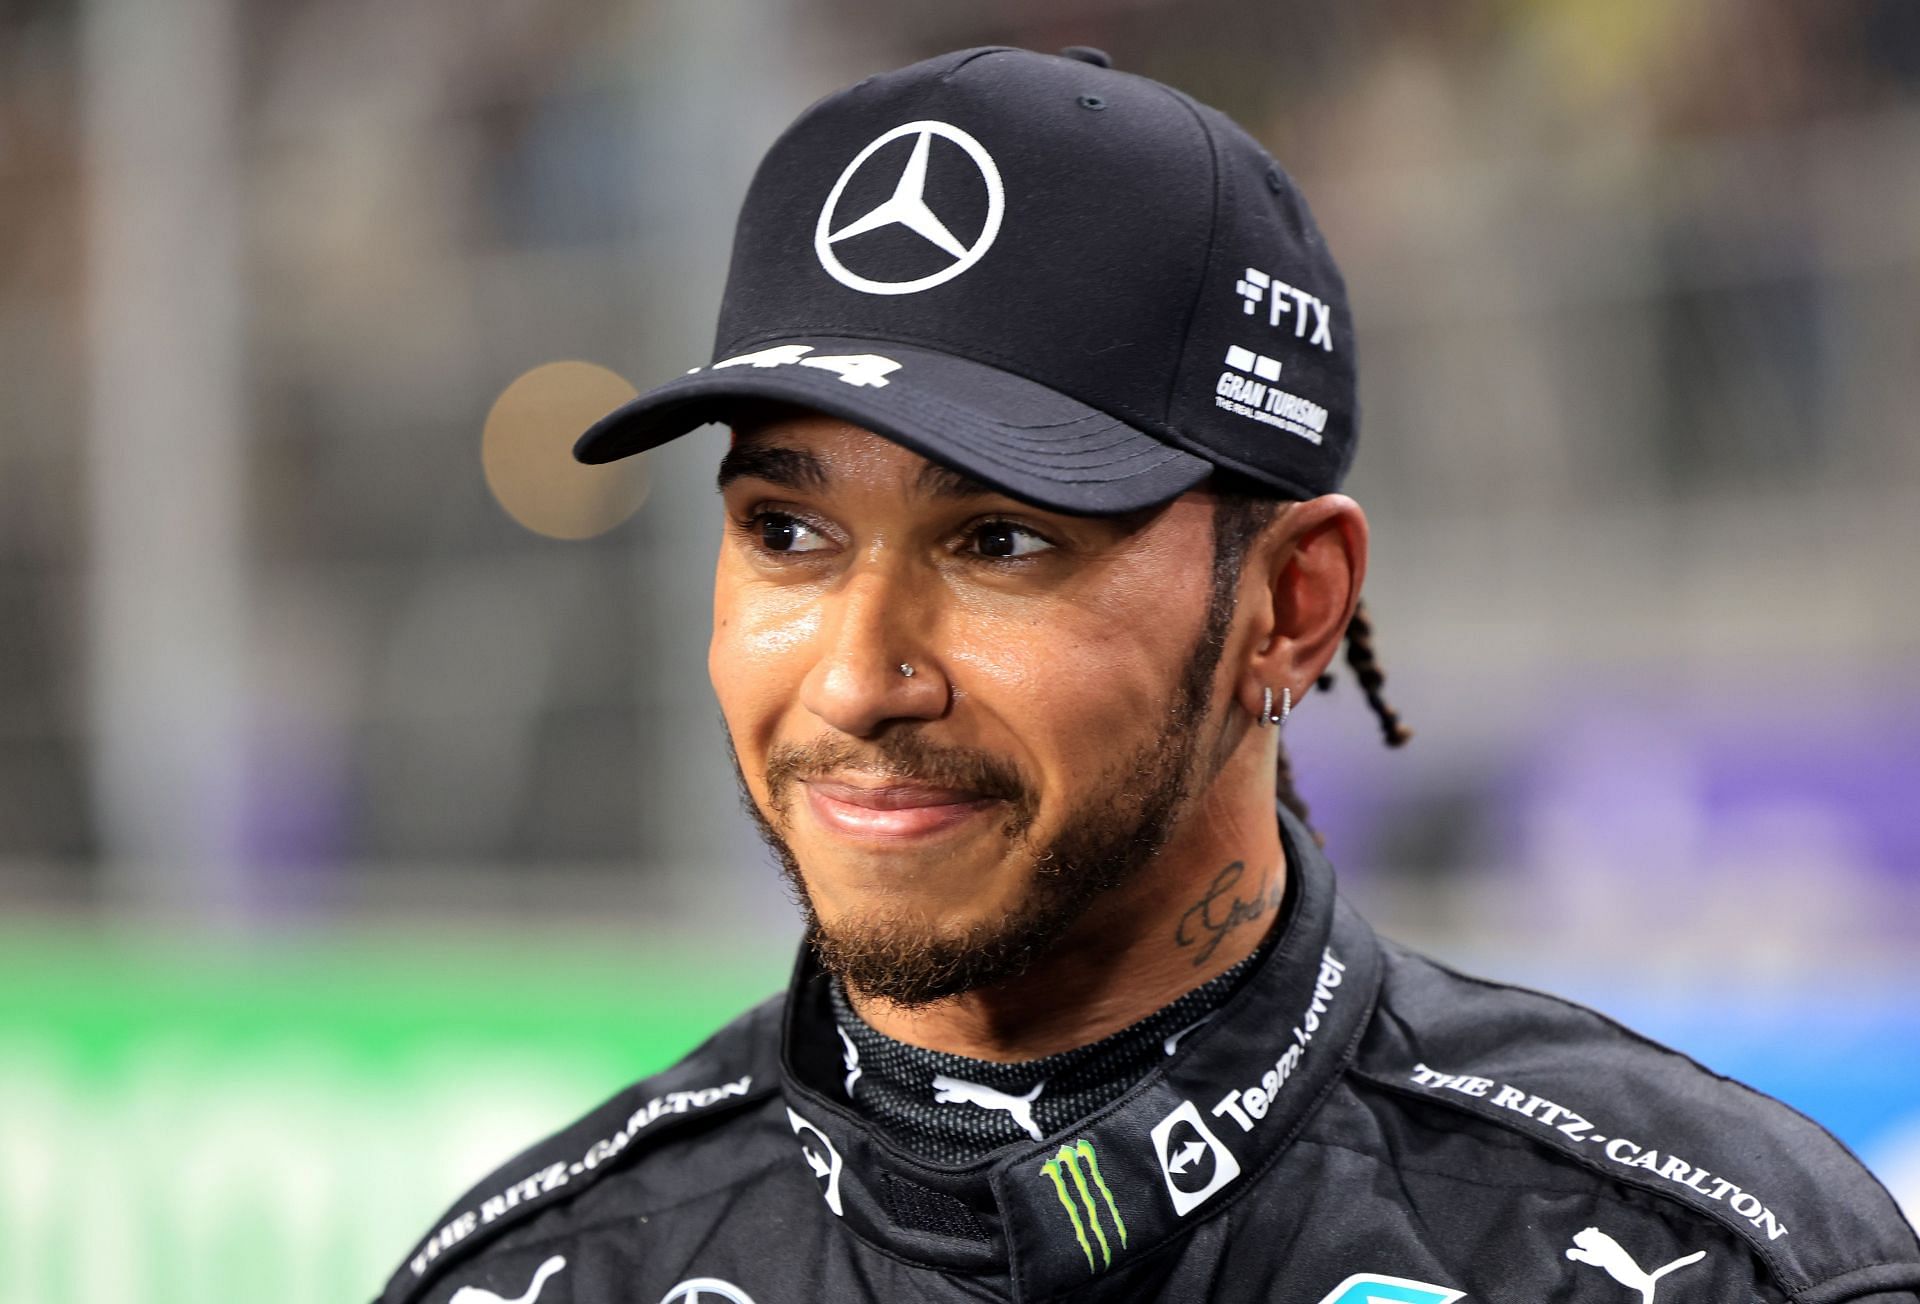 Lewis Hamilton distanced himself from the recent commentary Mercedes finds itself in